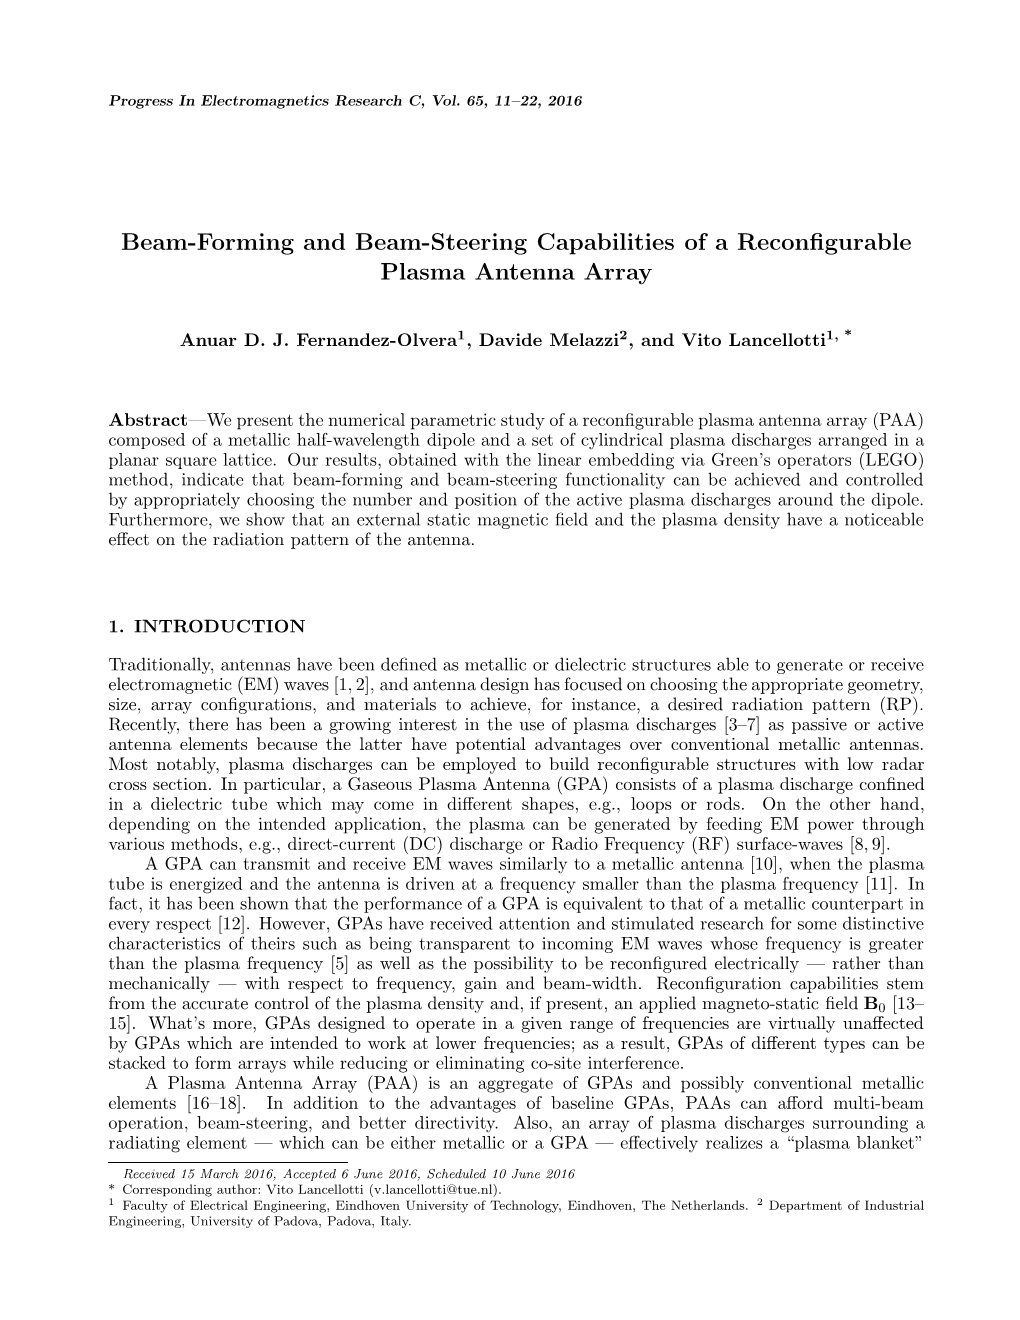 Beam-Forming and Beam-Steering Capabilities of a Reconfigurable